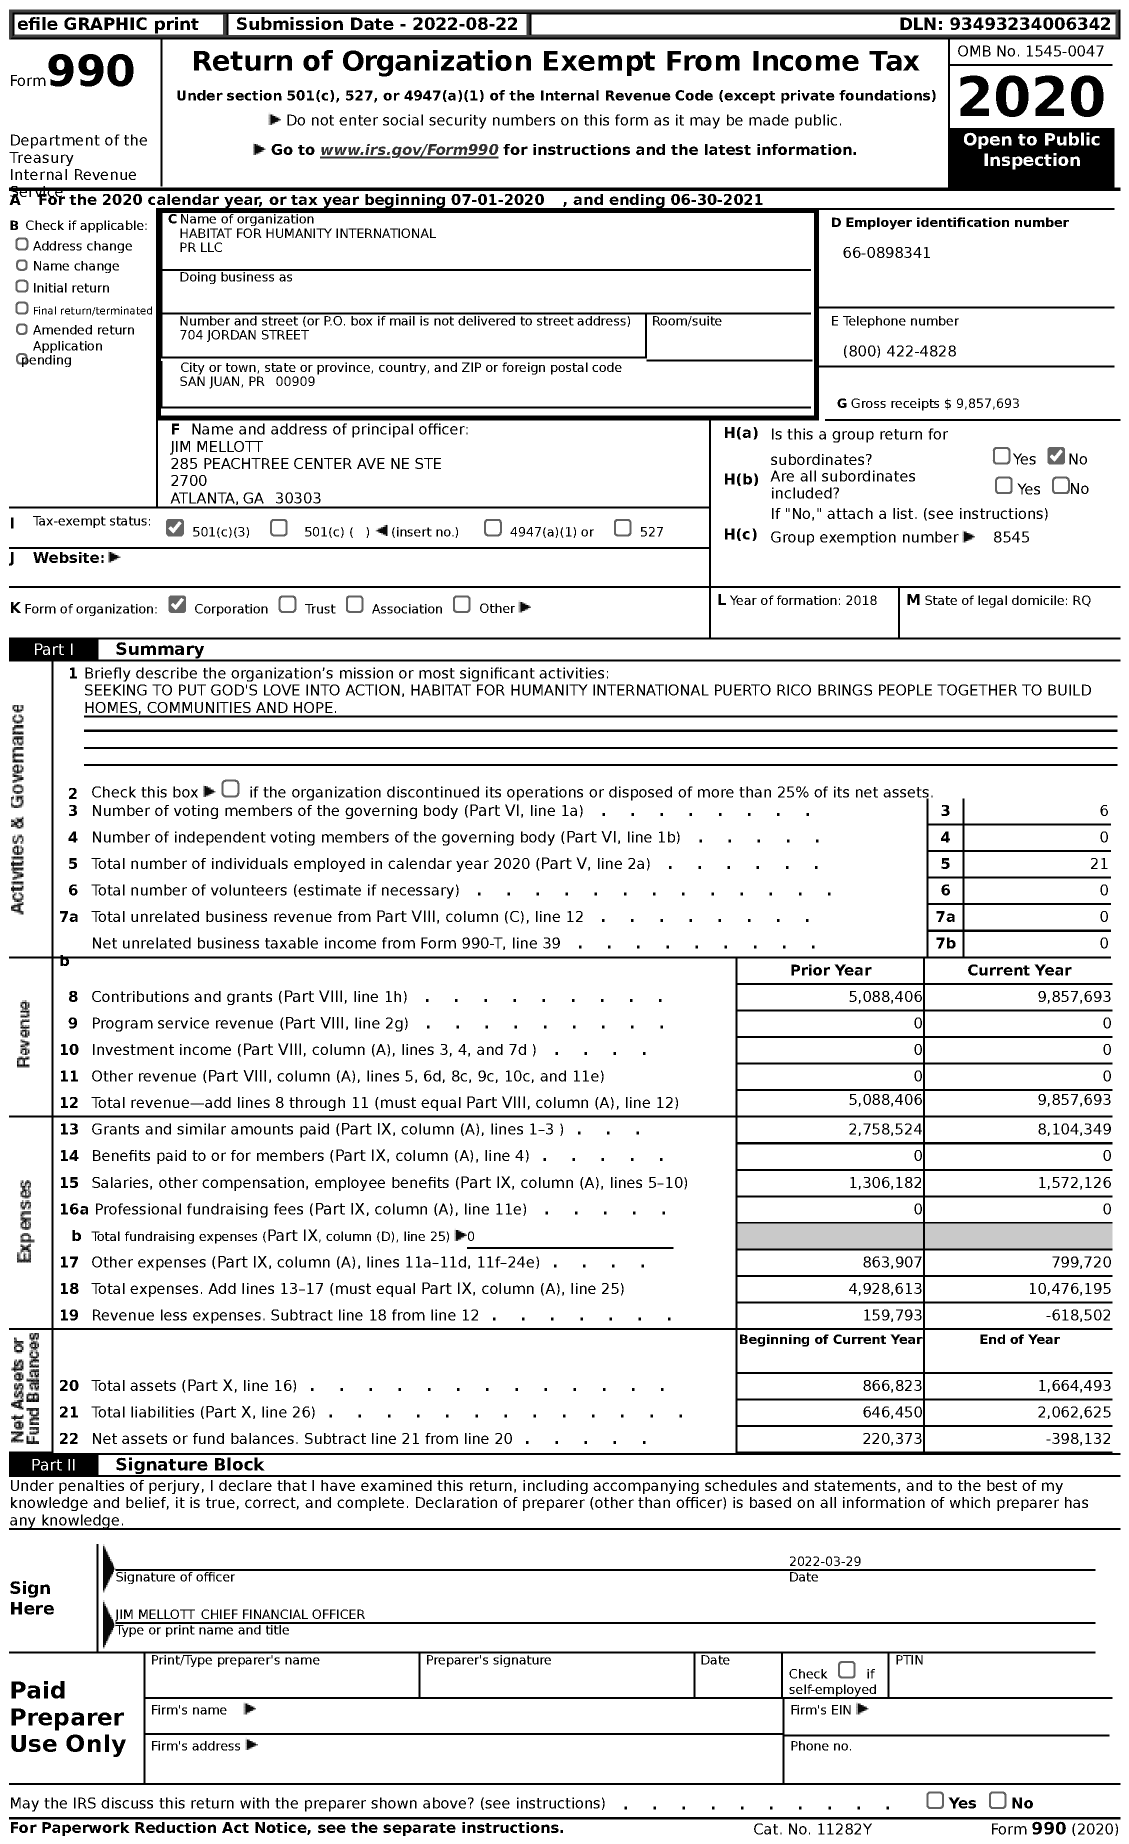 Image of first page of 2020 Form 990 for Habitat for Humanity - Habitat for Humanity International PR LLC